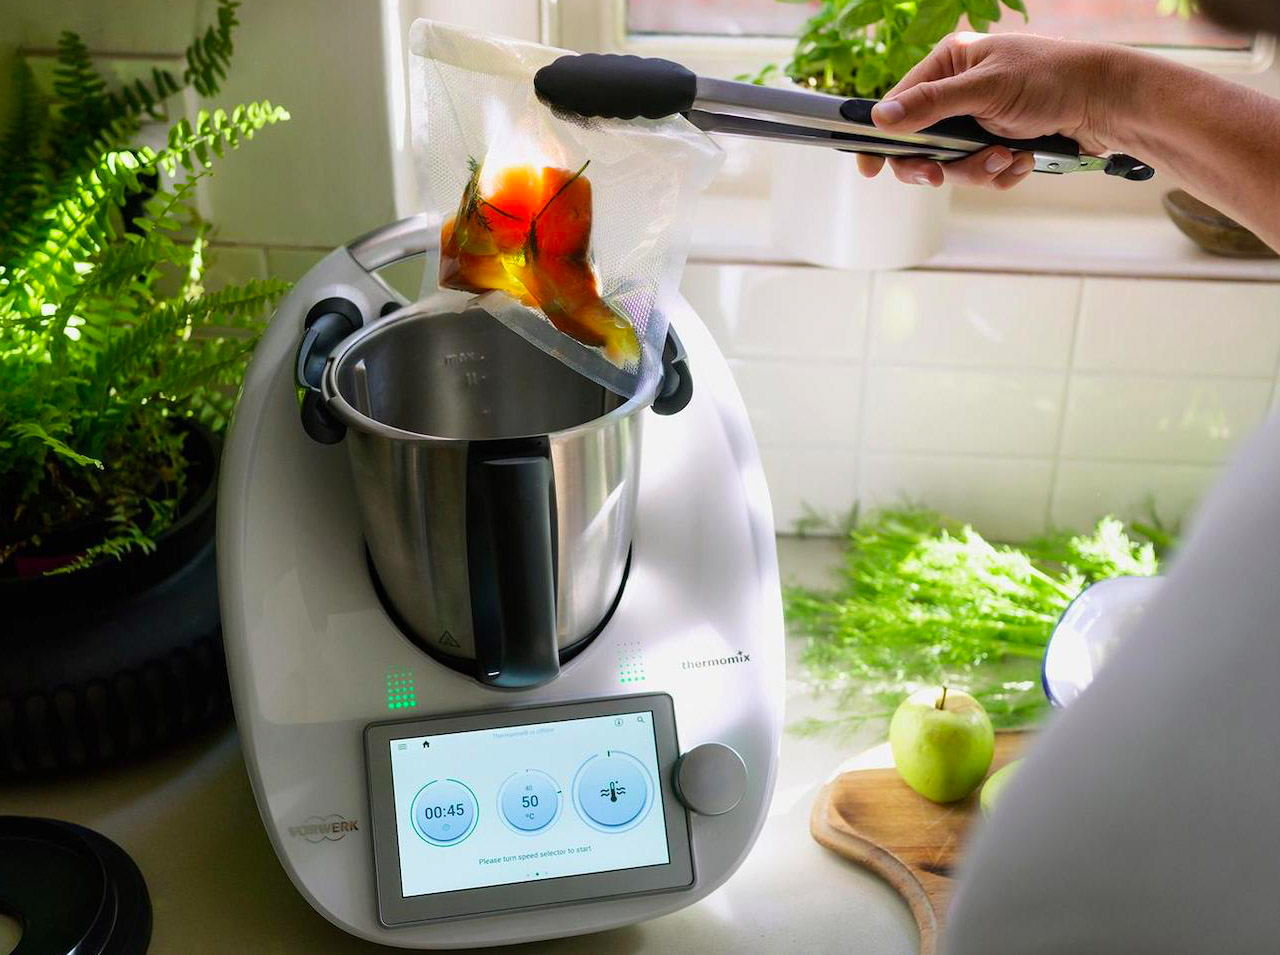 Connected cooking: The best smart kitchen devices and appliances